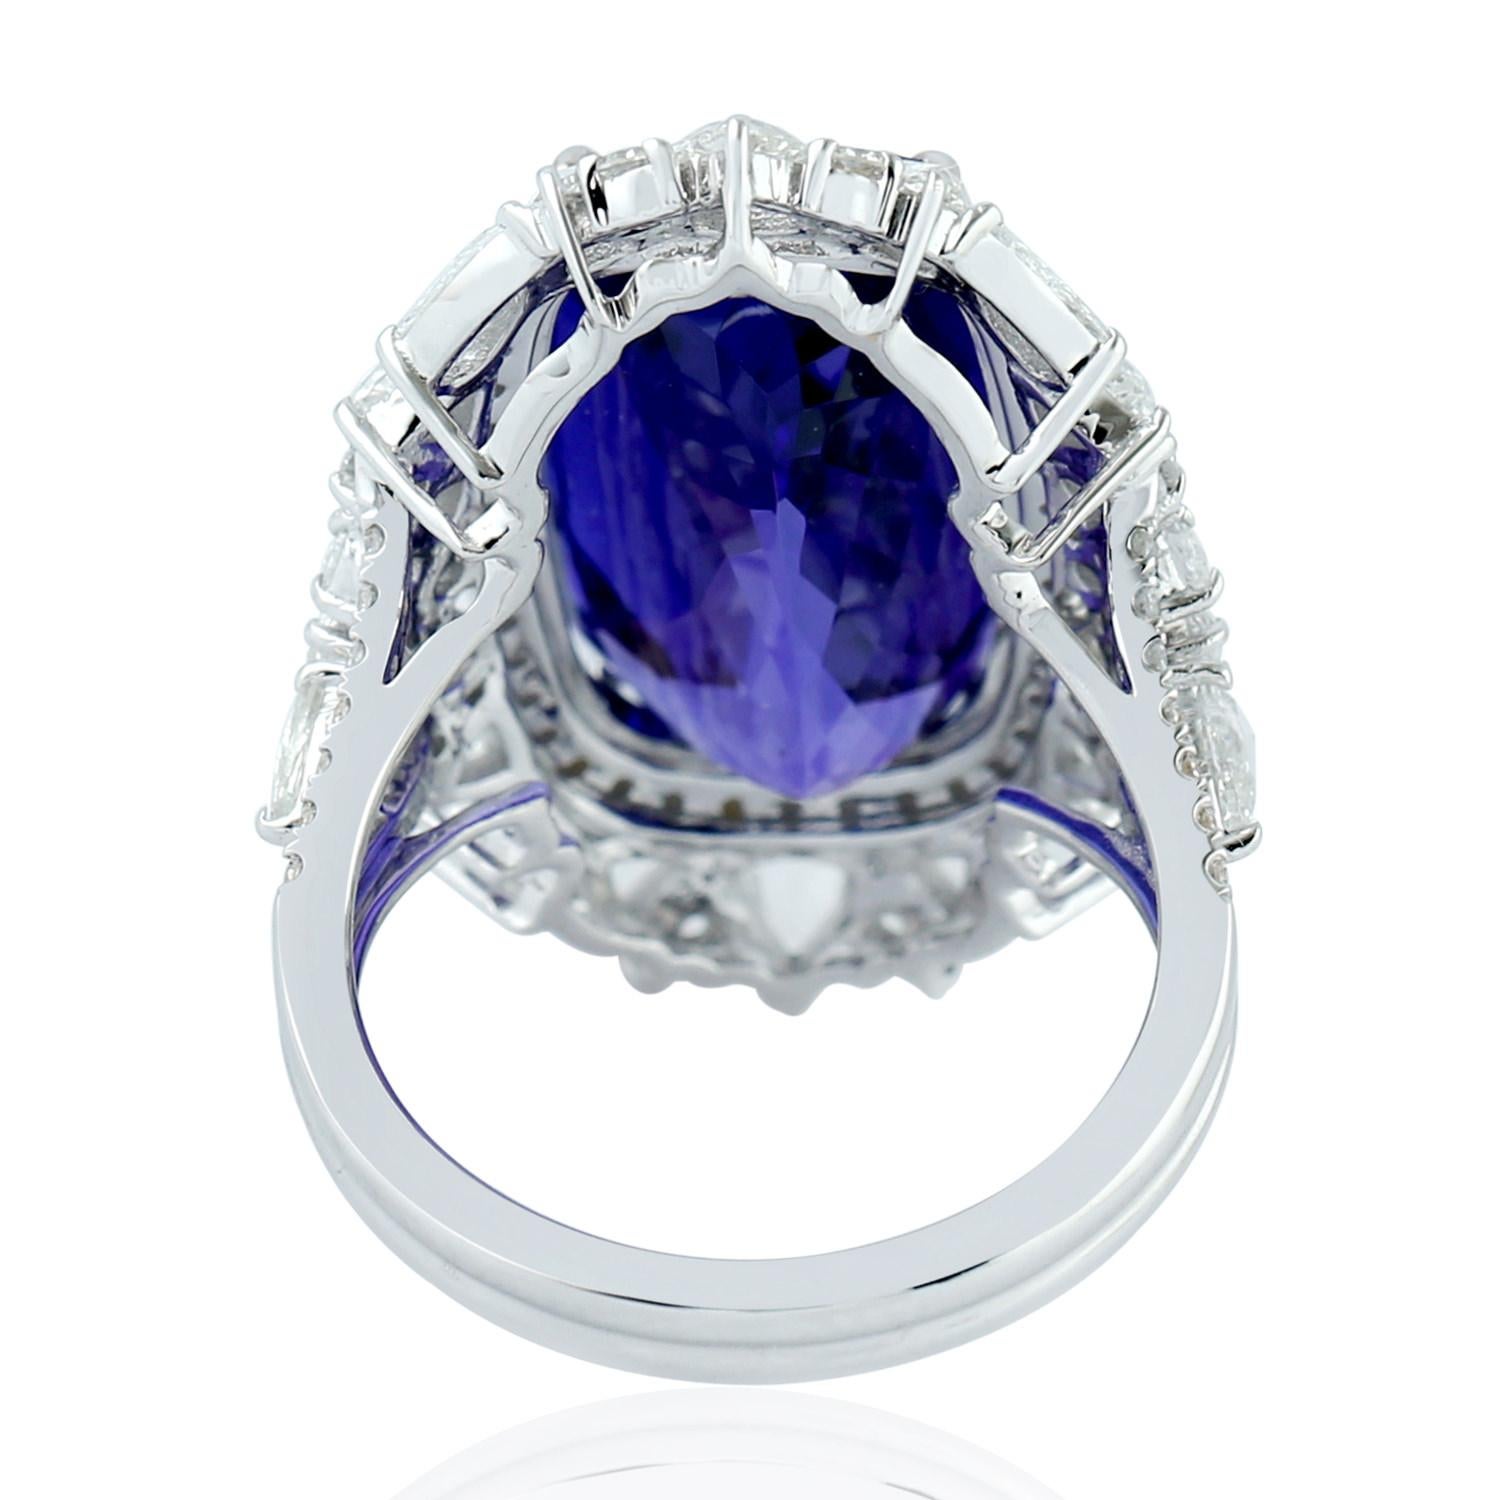 Modern Cushion Shape Tanzanite Ring With White Diamonds In 18K White Gold For Sale